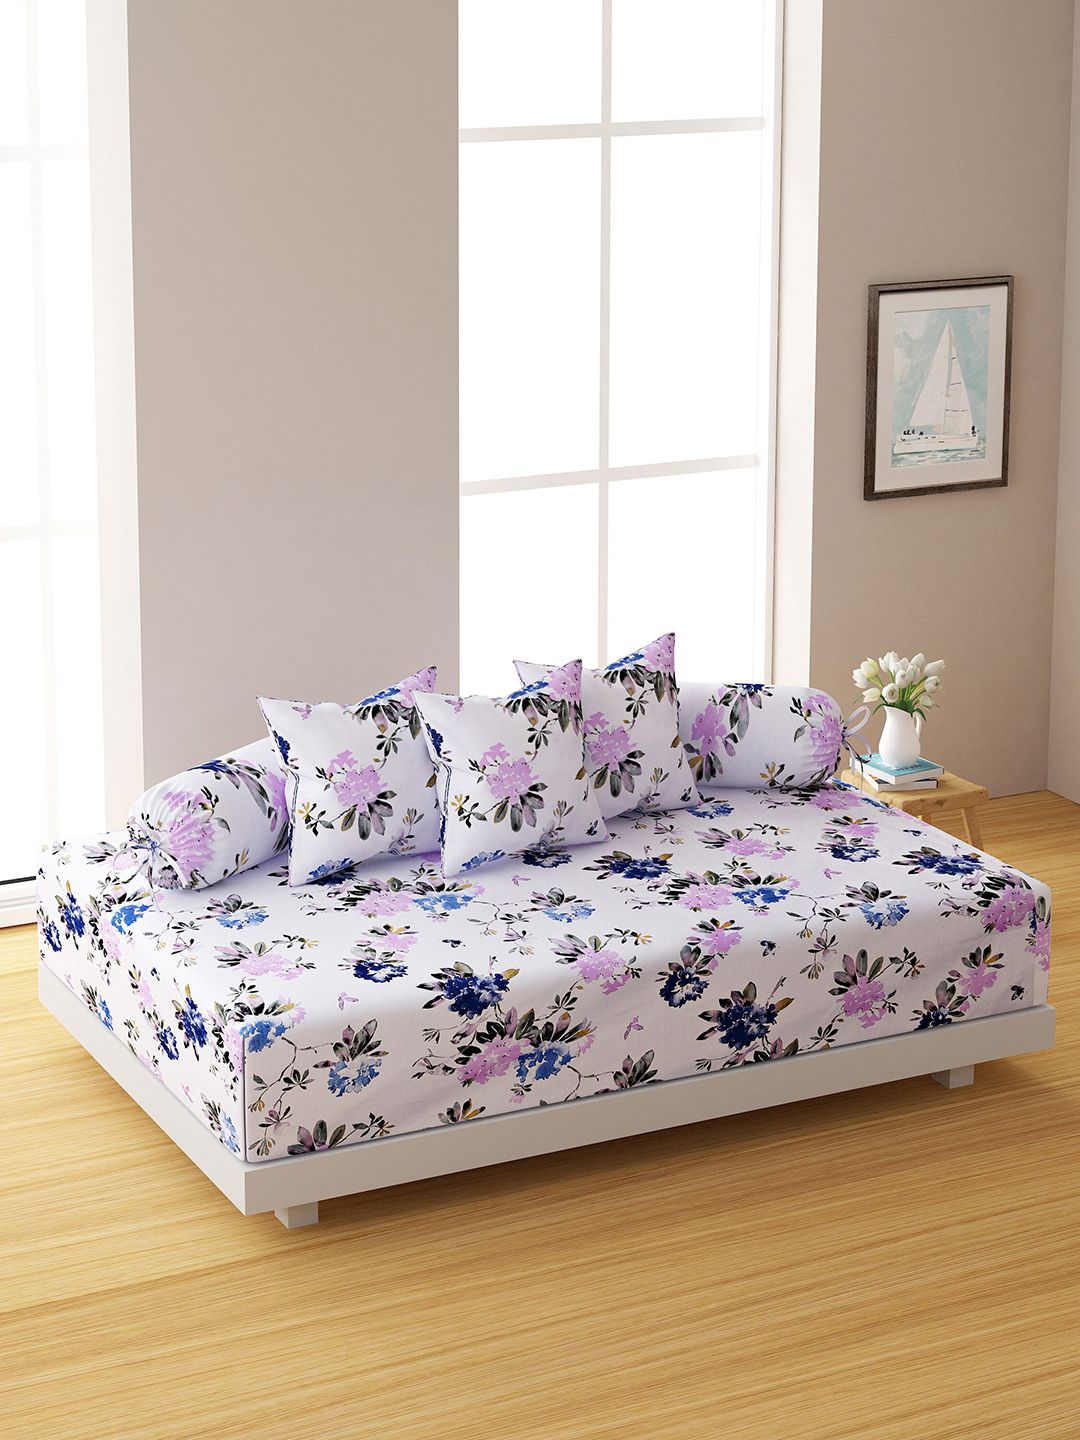 SWAYAM Set Of 6 White & Blue Floral Printed 200 TC Bedsheet With Bolster & Cushion Covers Price in India